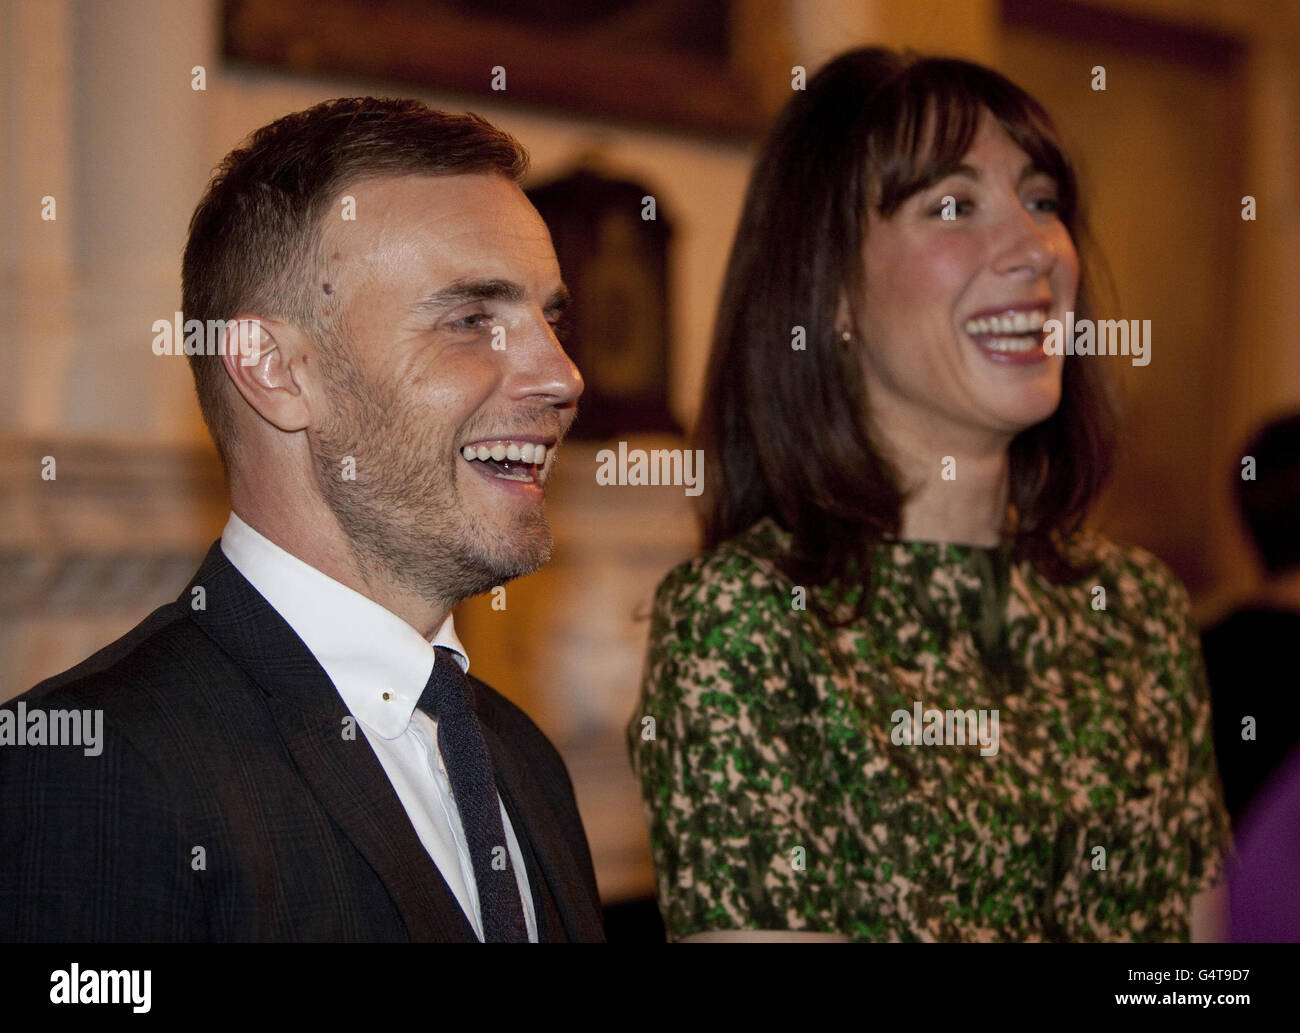 Prime Minister's wife Samantha Cameron stands with singer Gary Barlow during a reception at 10 Downing street for supporters and beneficiaries of the BBC's Children in Need charity. Stock Photo